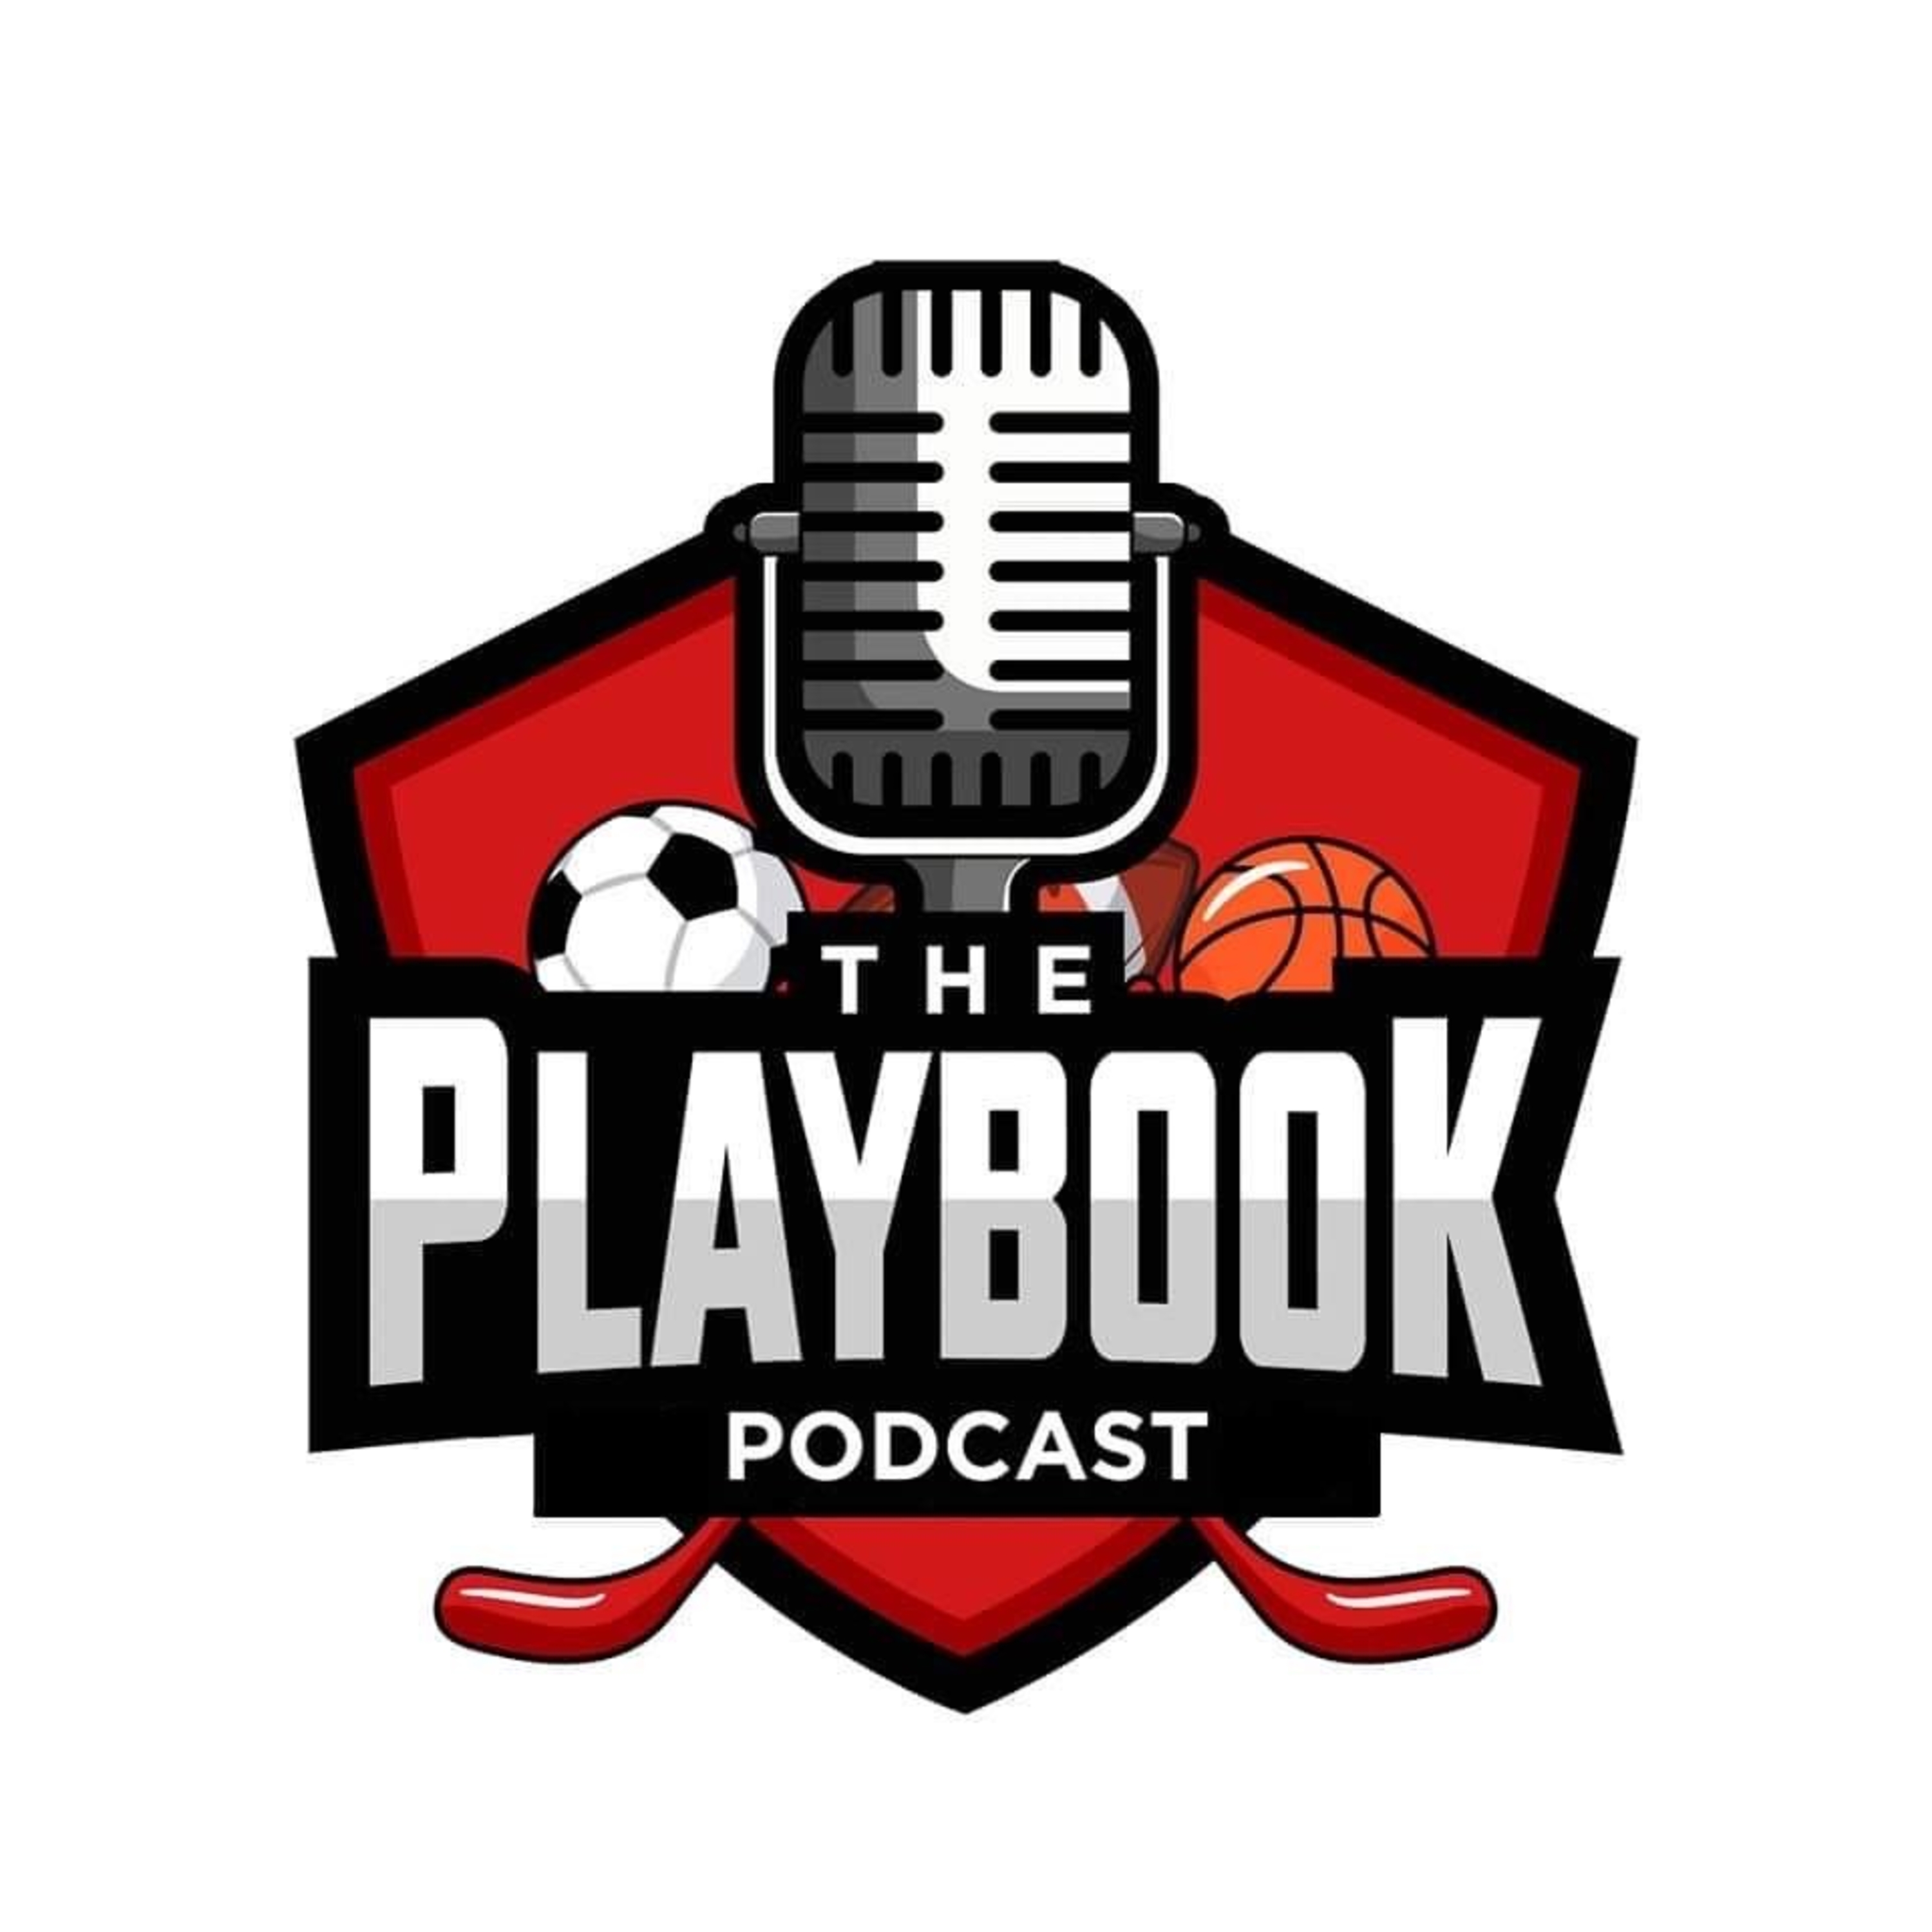 Artwork for The Playbook Podcast